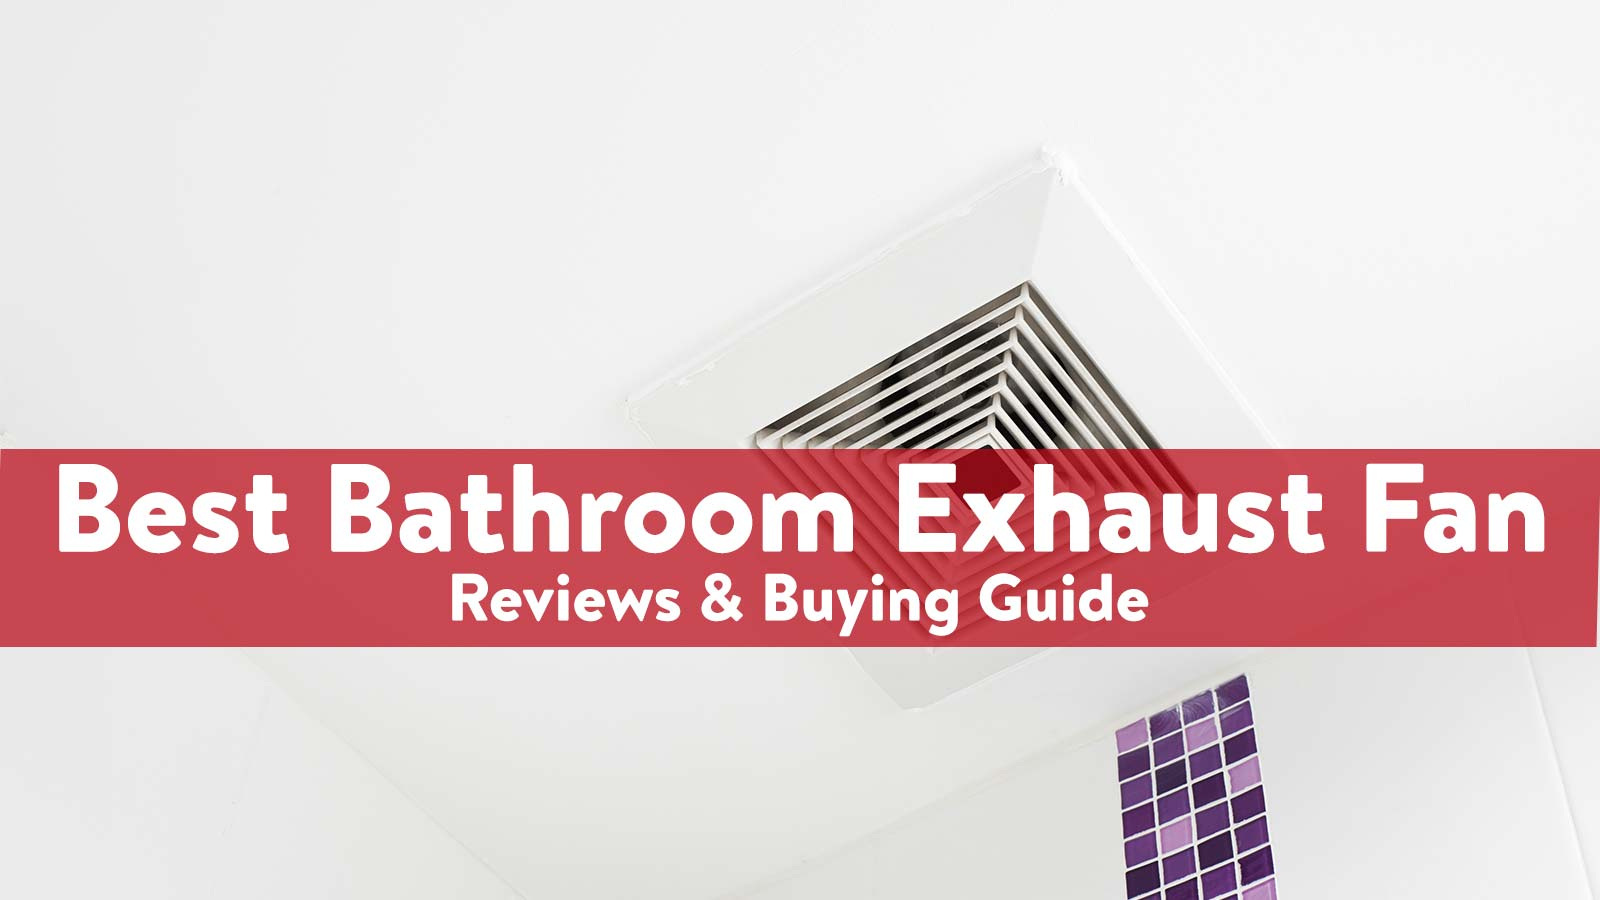 10 Best Bathroom Exhaust Fans Reviews Buying Guide 2020 for measurements 1600 X 900